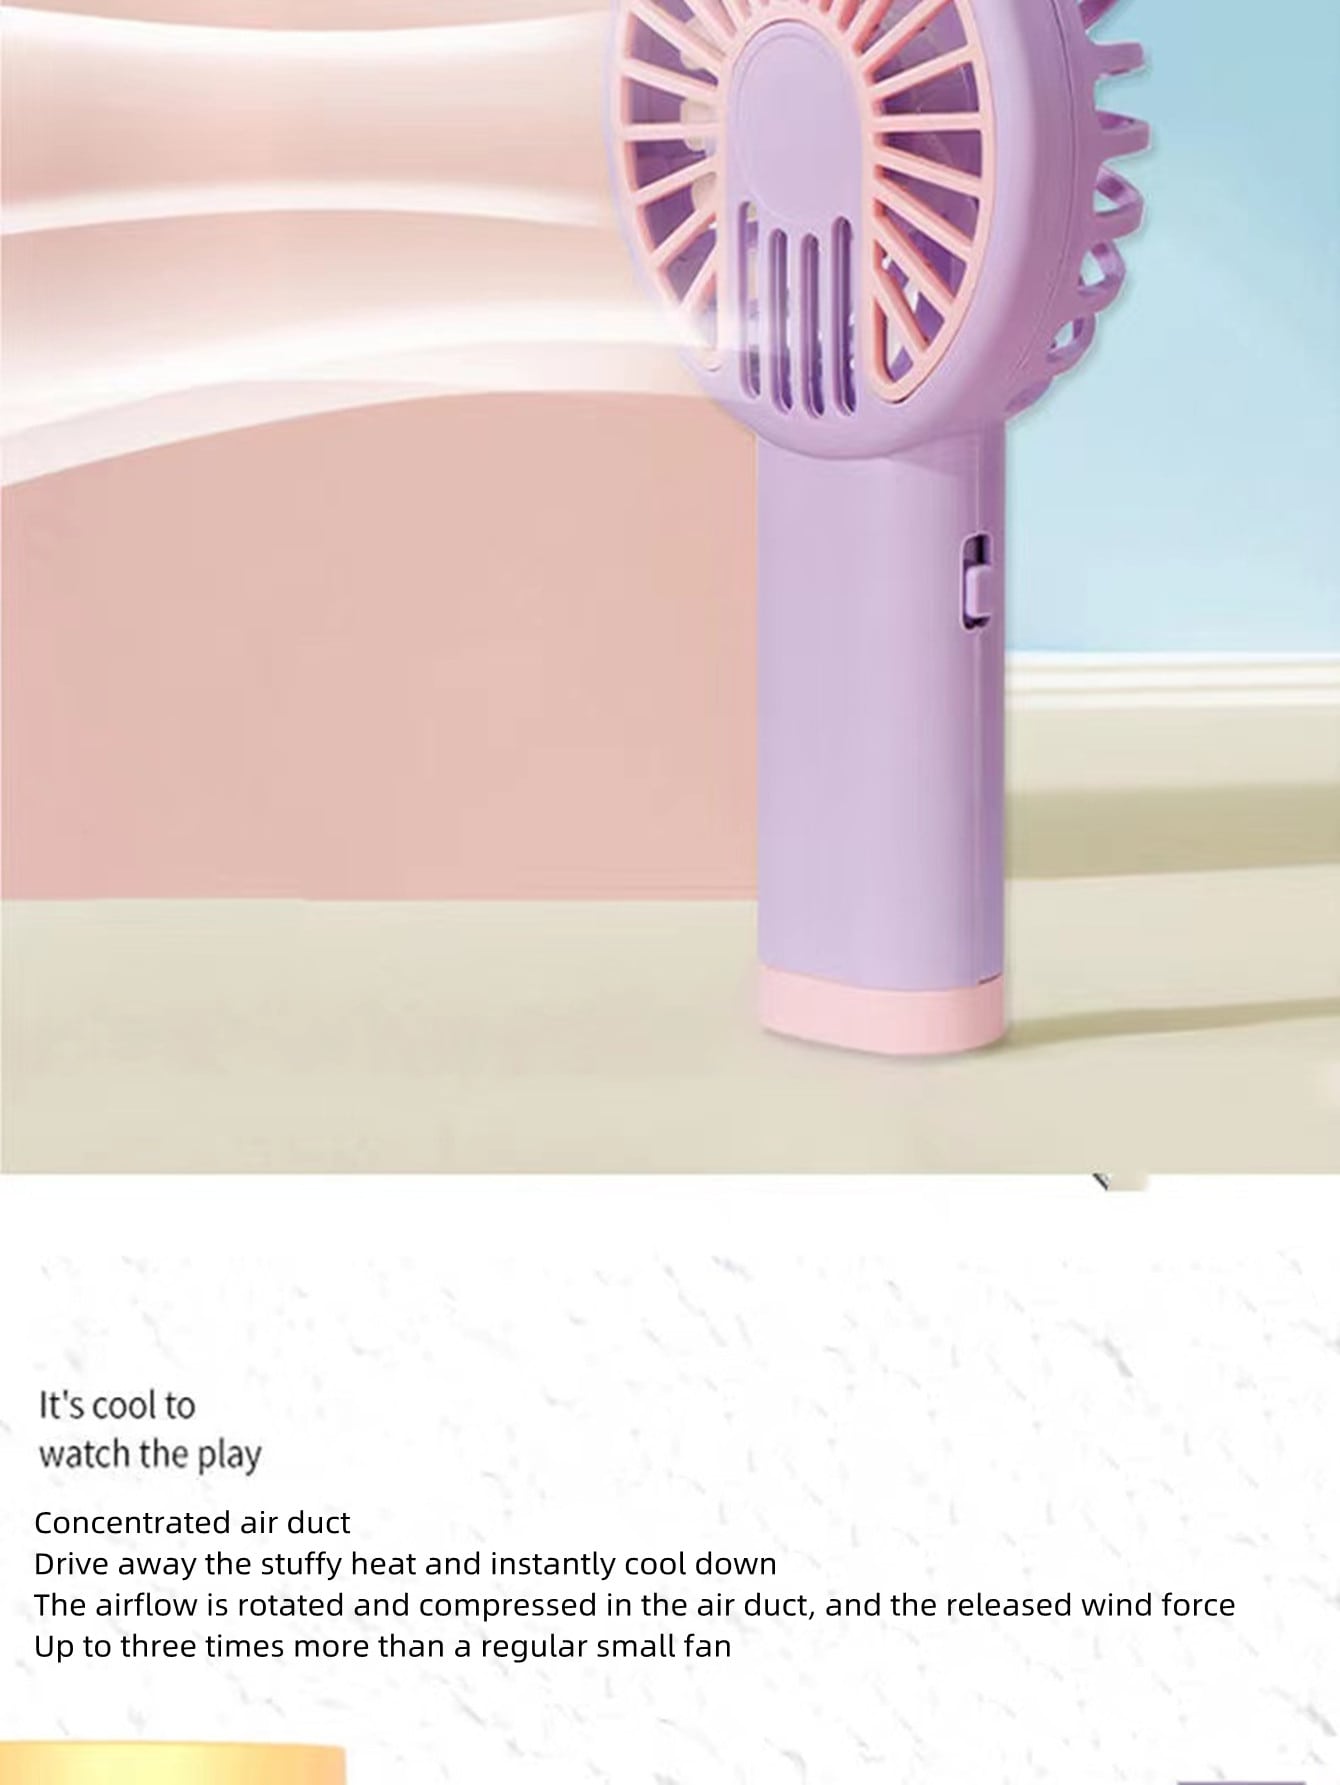 Portable Handheld Electric Fan With High Wind Power For Carrying, Recharging, Camping, Manual Operation, Low Noise-Purple-2